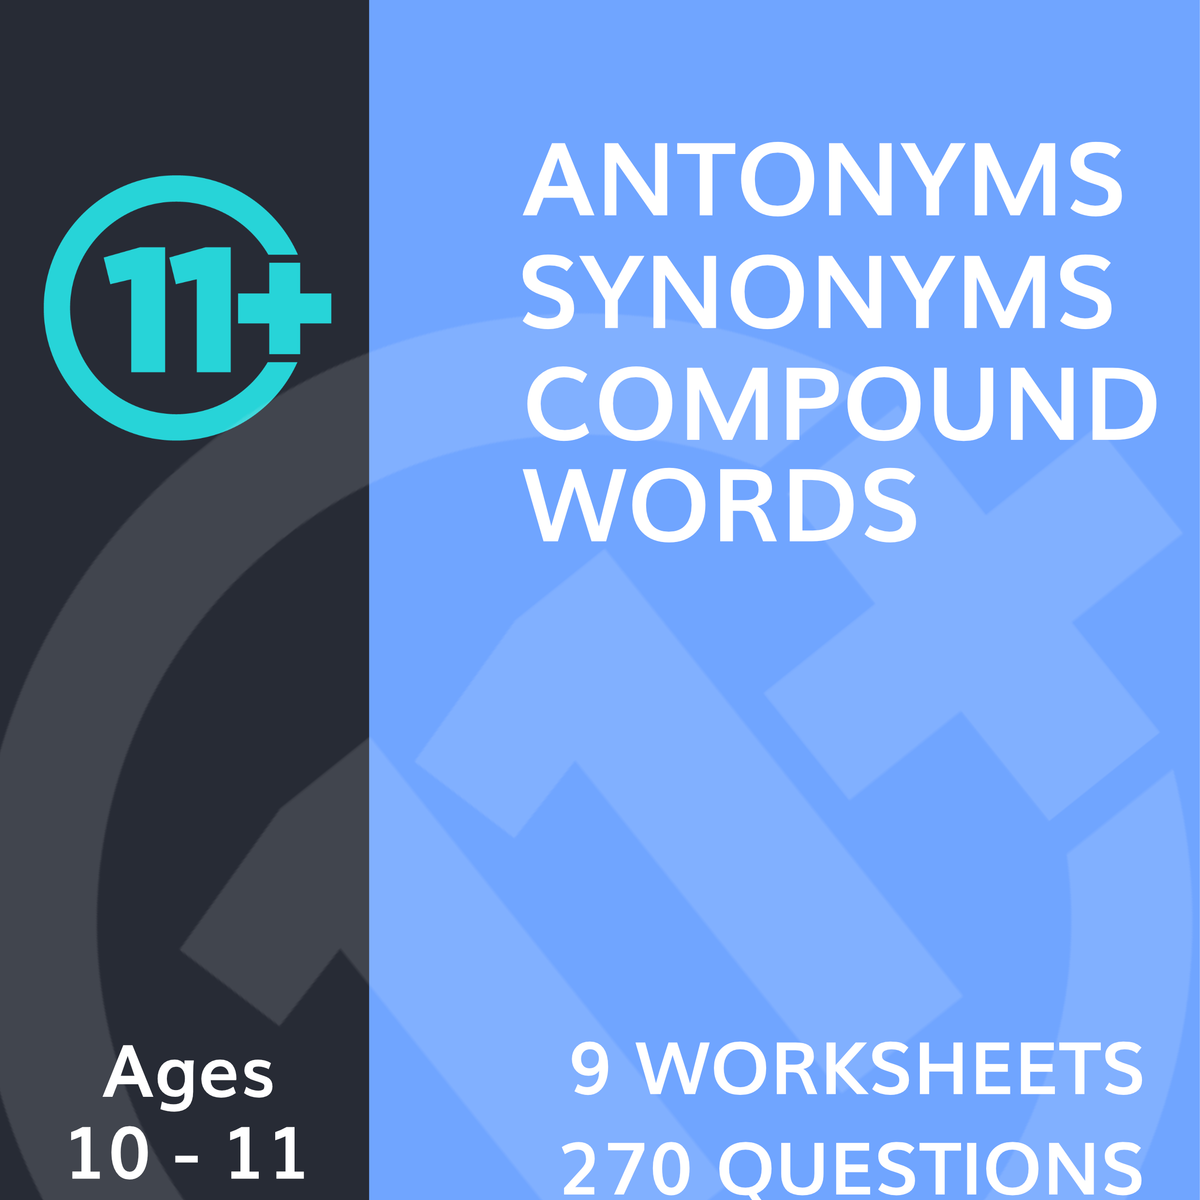 11+ Free Synonym Sheets  11+ Tuition & 11+ Mock Tests